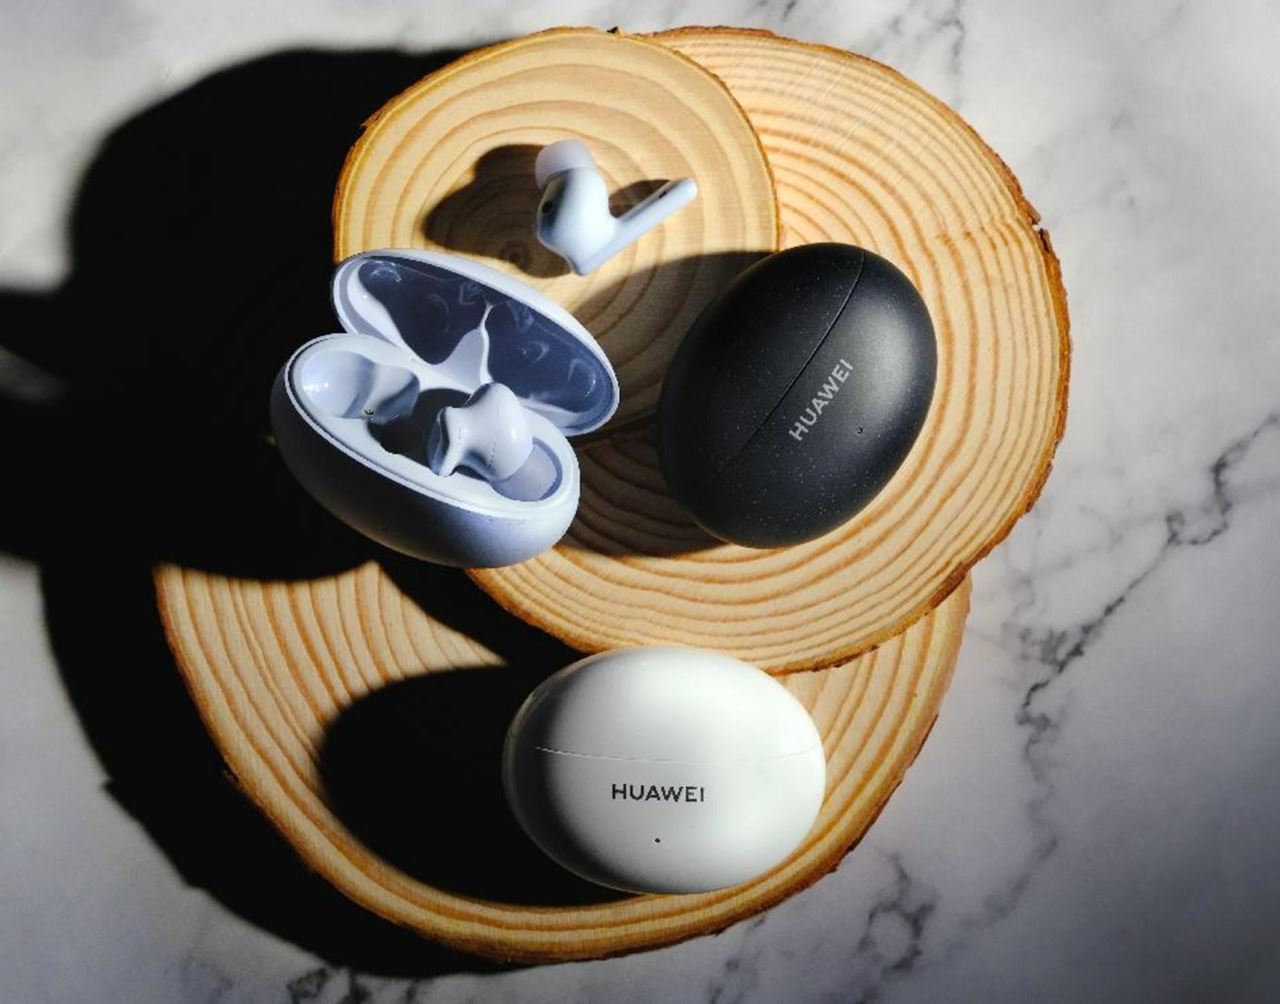 HUAWEI FreeBuds 5i - The latest true wireless earphones from Huawei checks all the right boxes